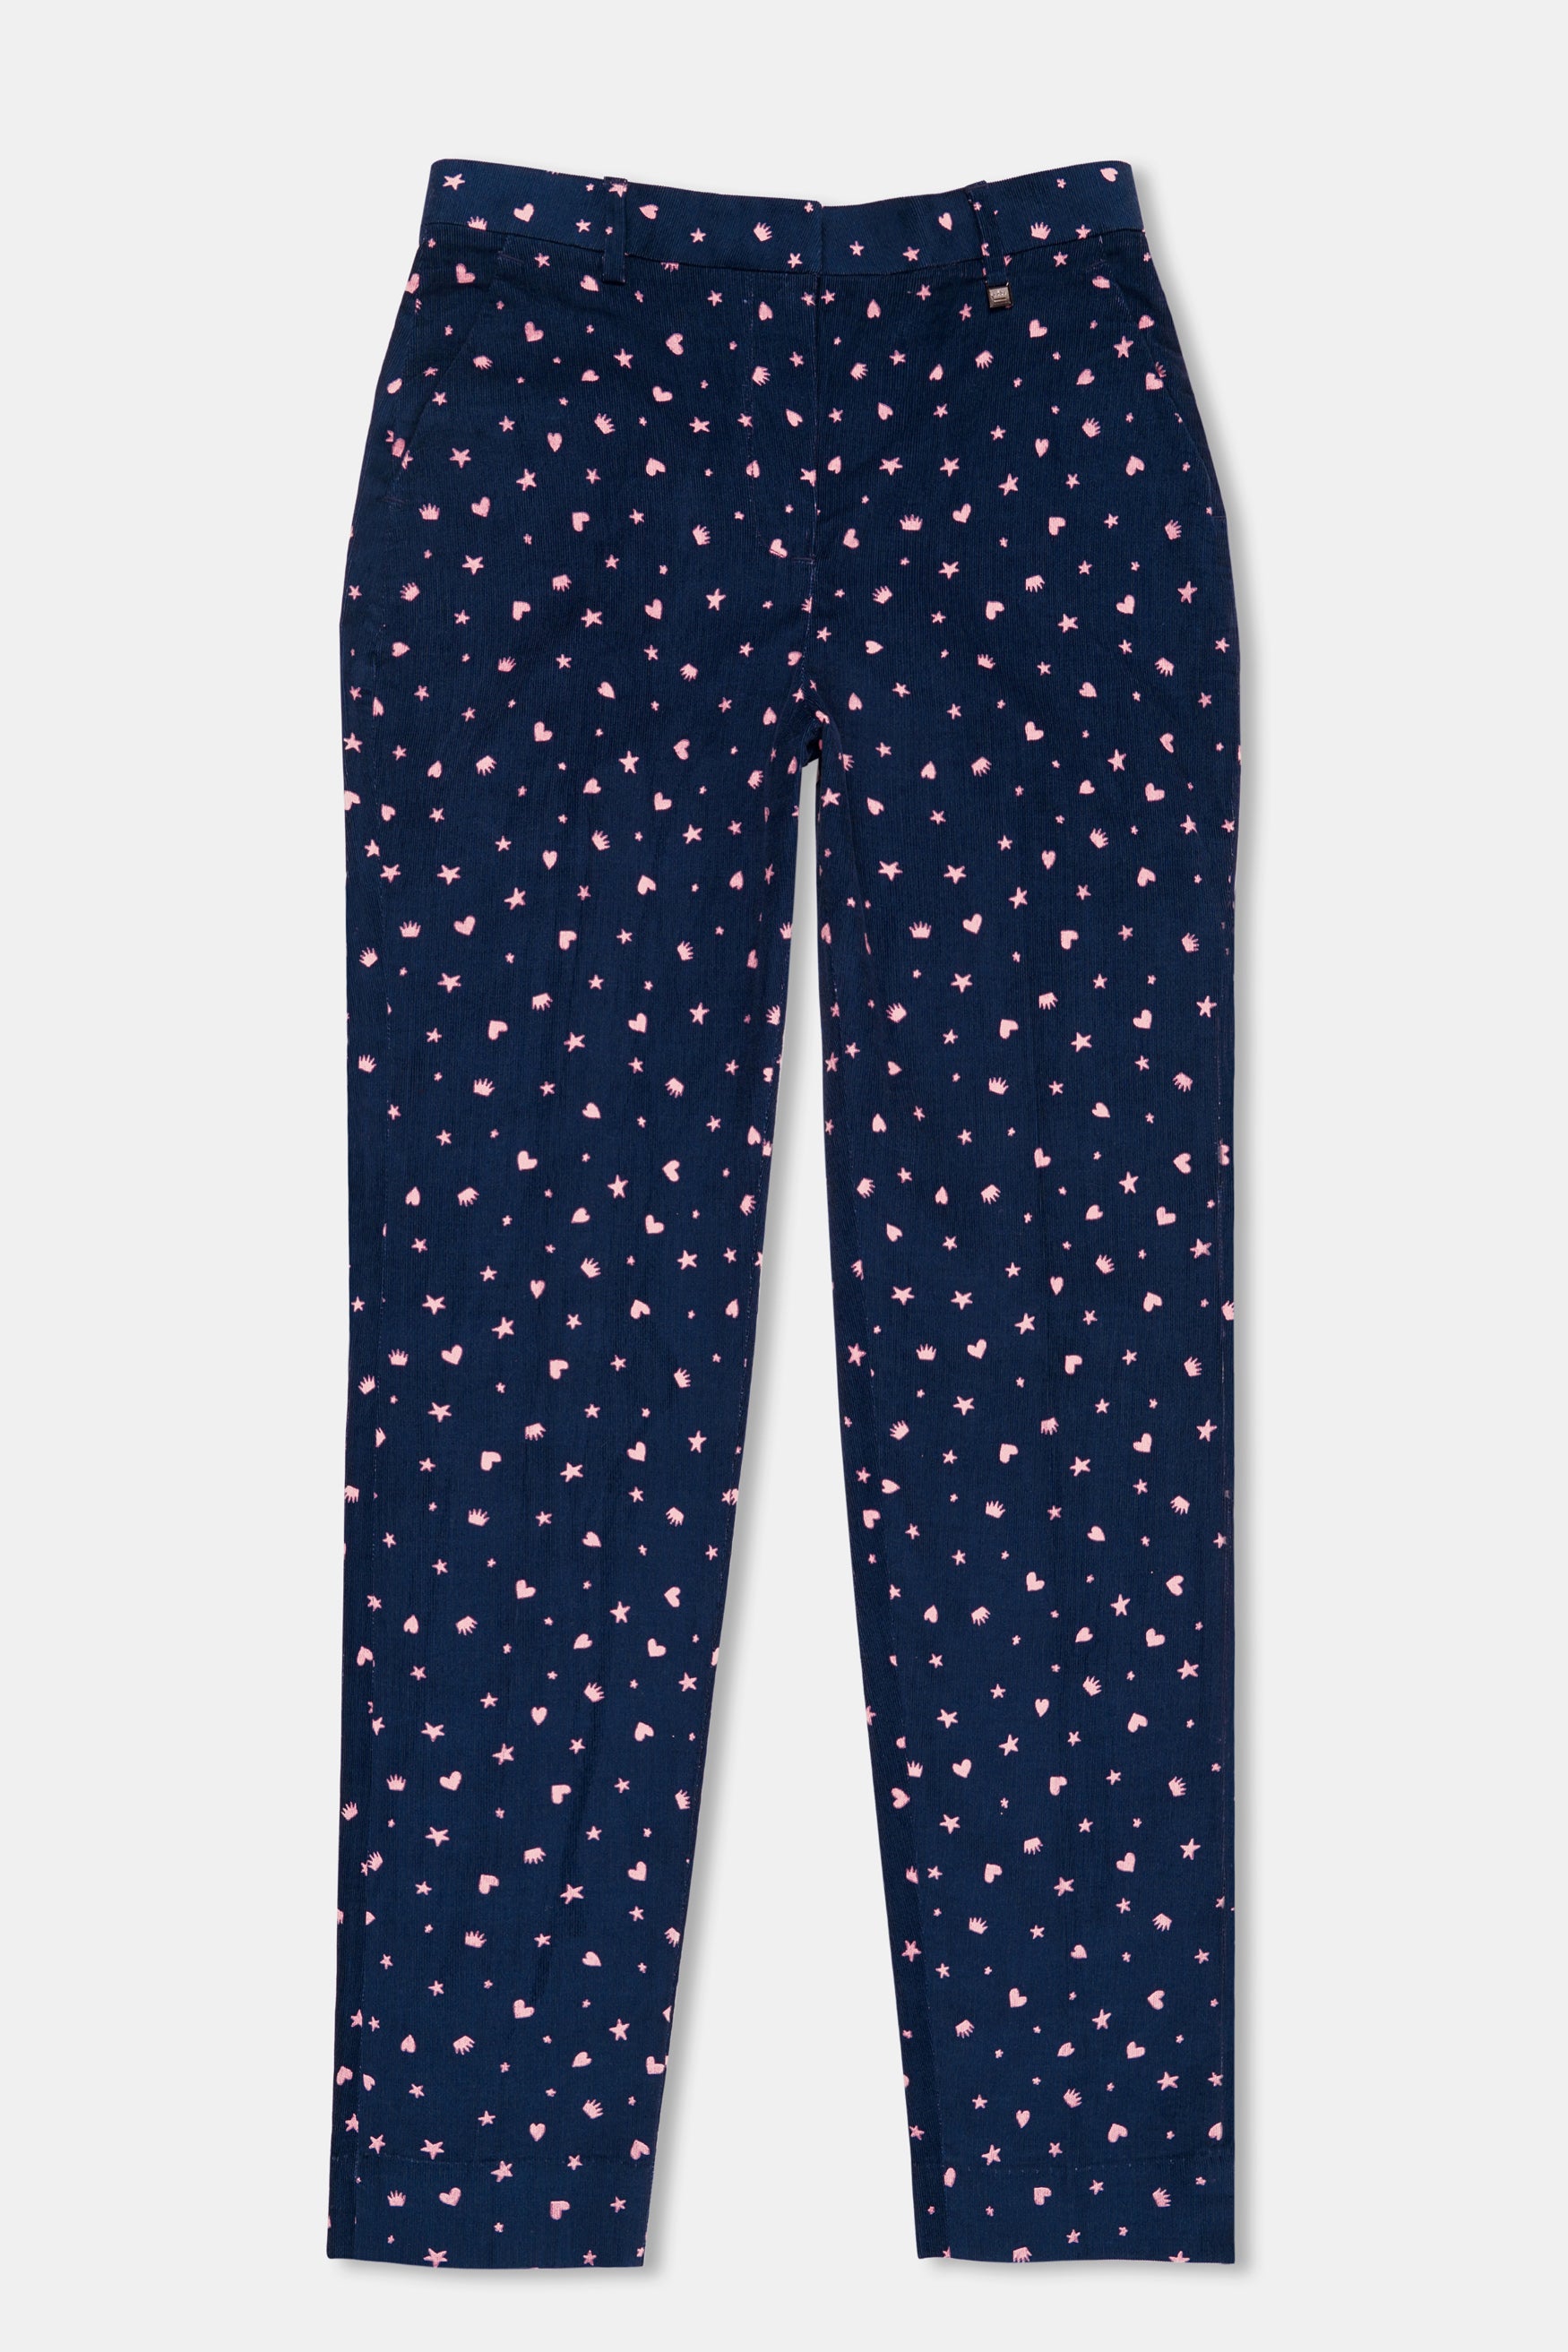 Downriver Blue and Cavern Pink Shapes Printed Premium Cotton Women’s Pant